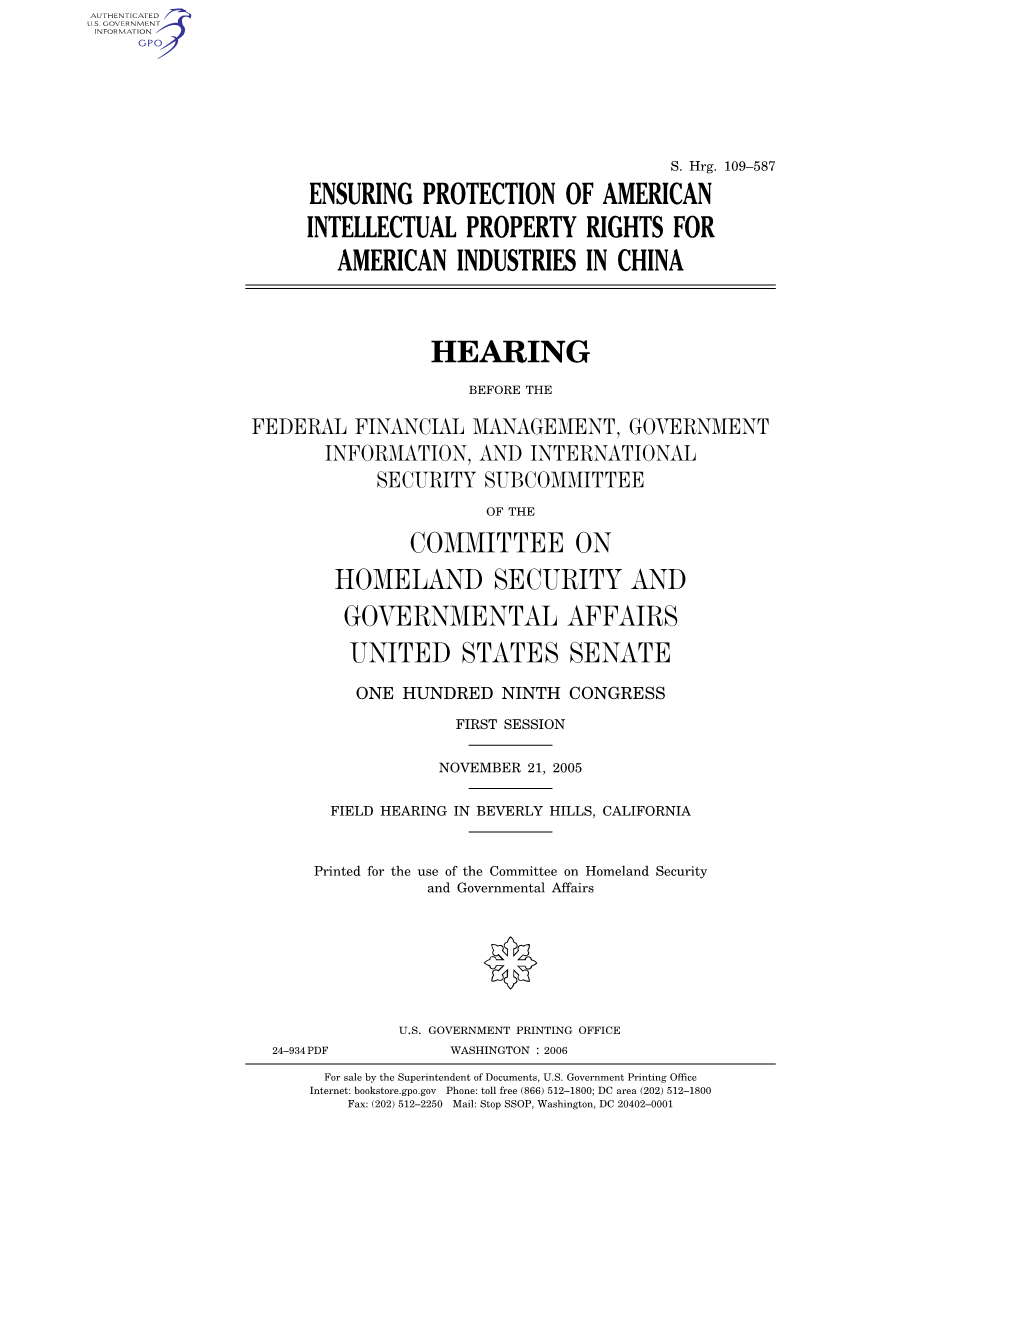 Ensuring Protection of American Intellectual Property Rights for American Industries in China